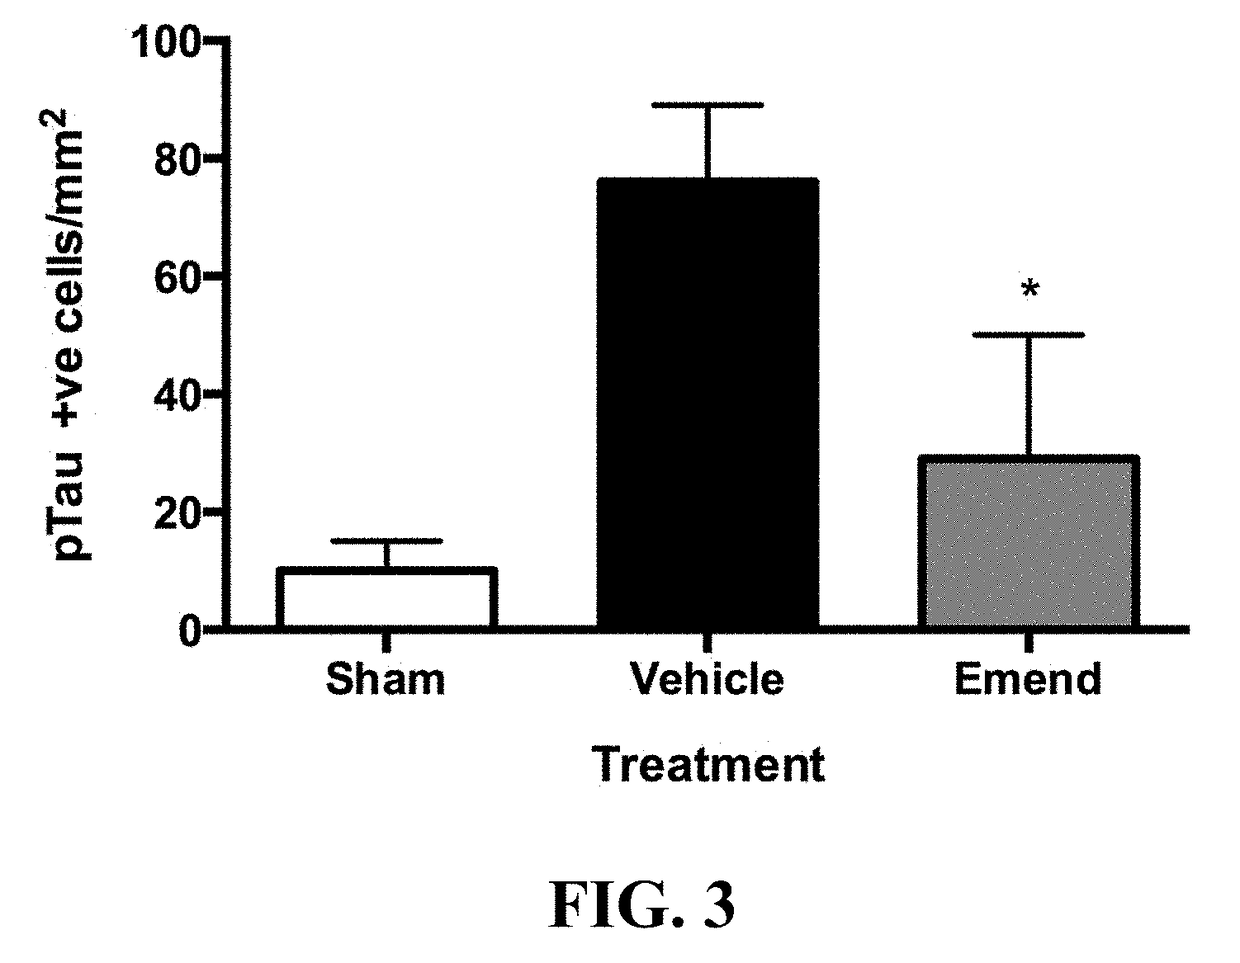 Method for preventing and/or treating chronic traumatic encephalopathy - iii